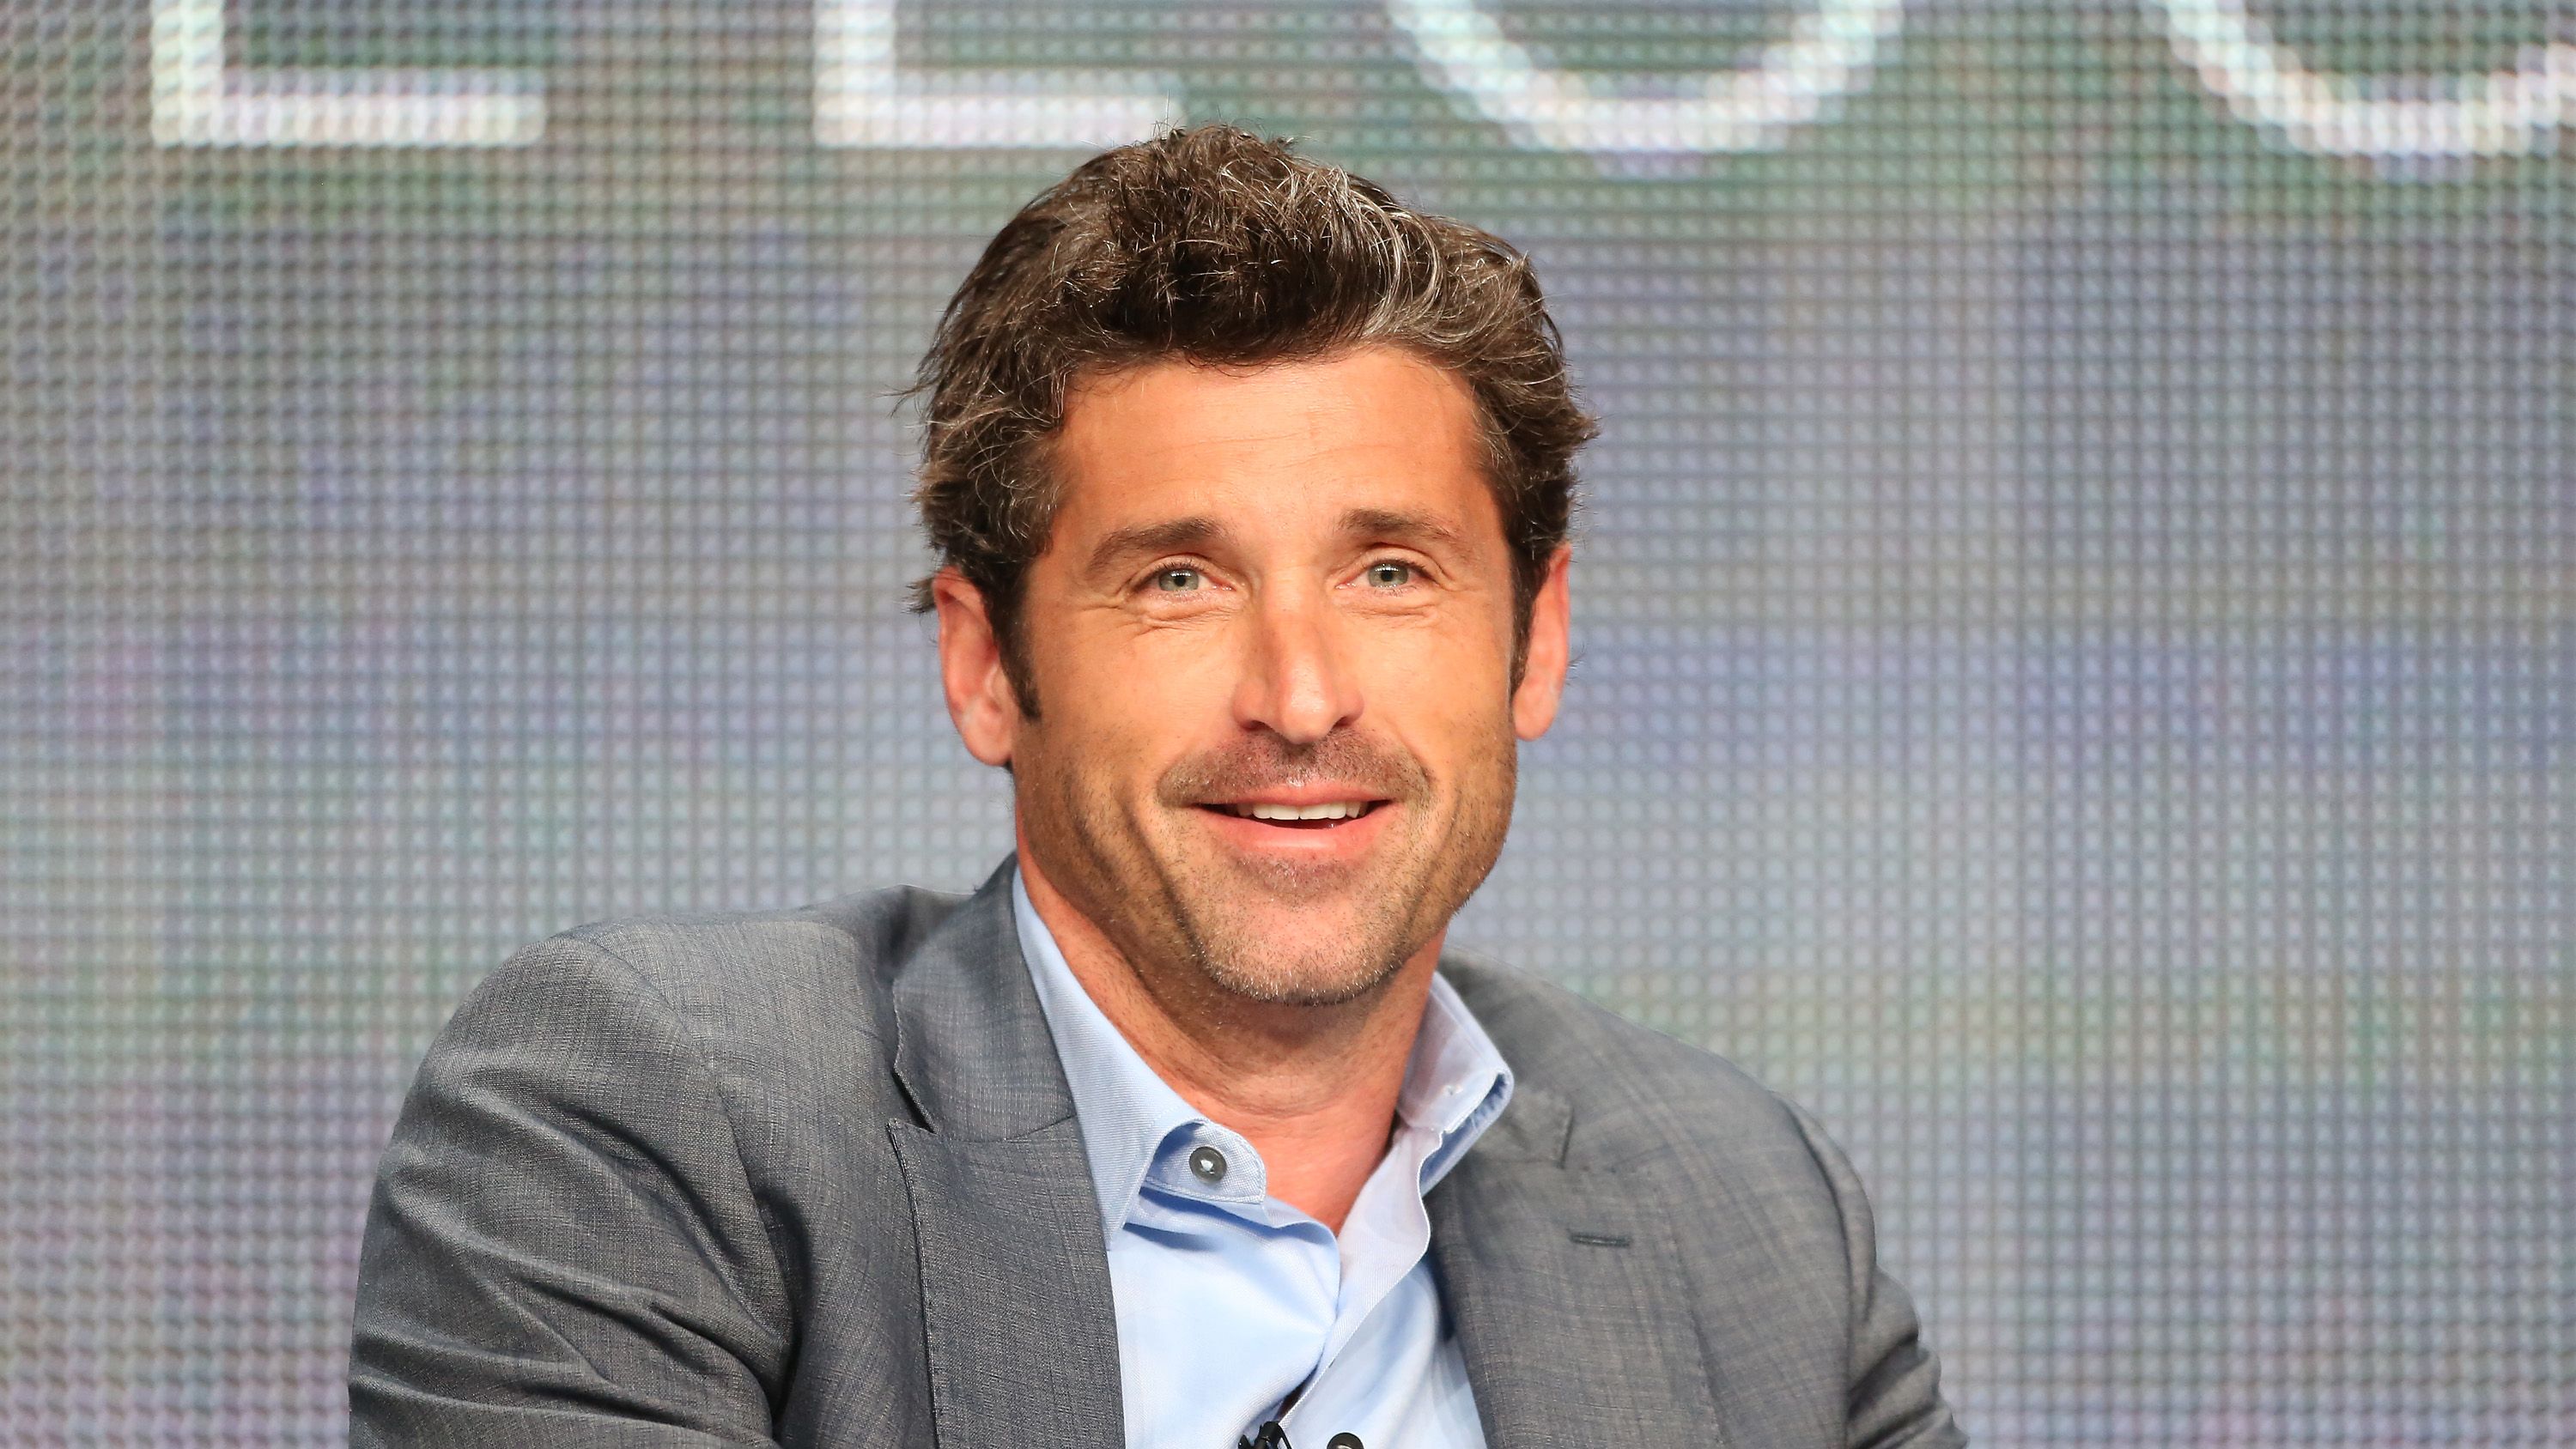 Patrick Dempsey's Net Worth and 'Grey's Anatomy' Earnings